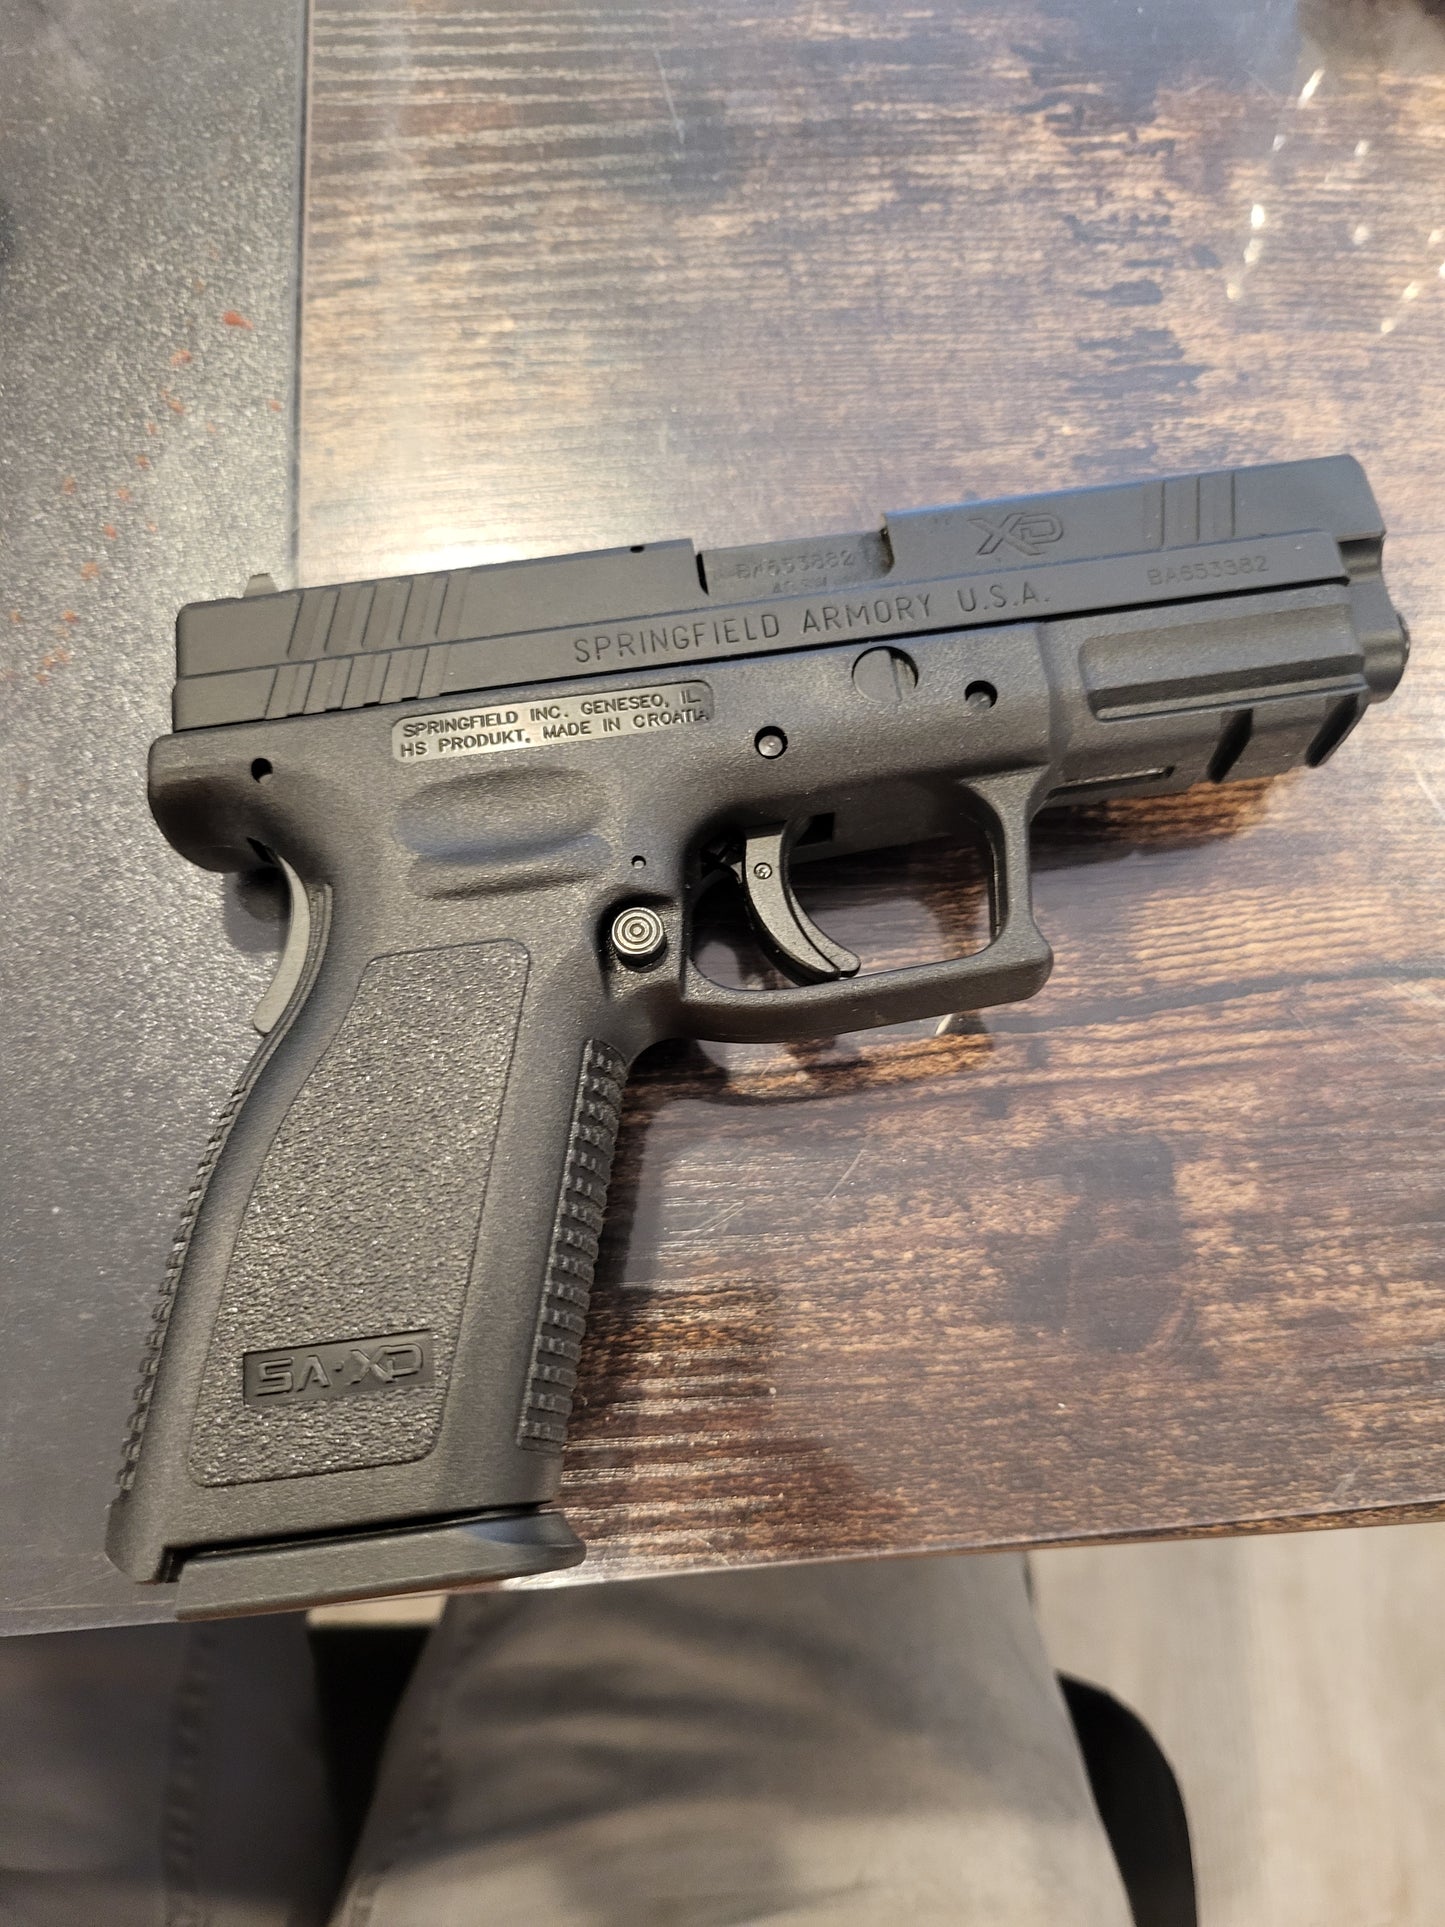 Springfield Armory XD .40 S&W Pistol 4" with 10 rd CA COMPLIANT